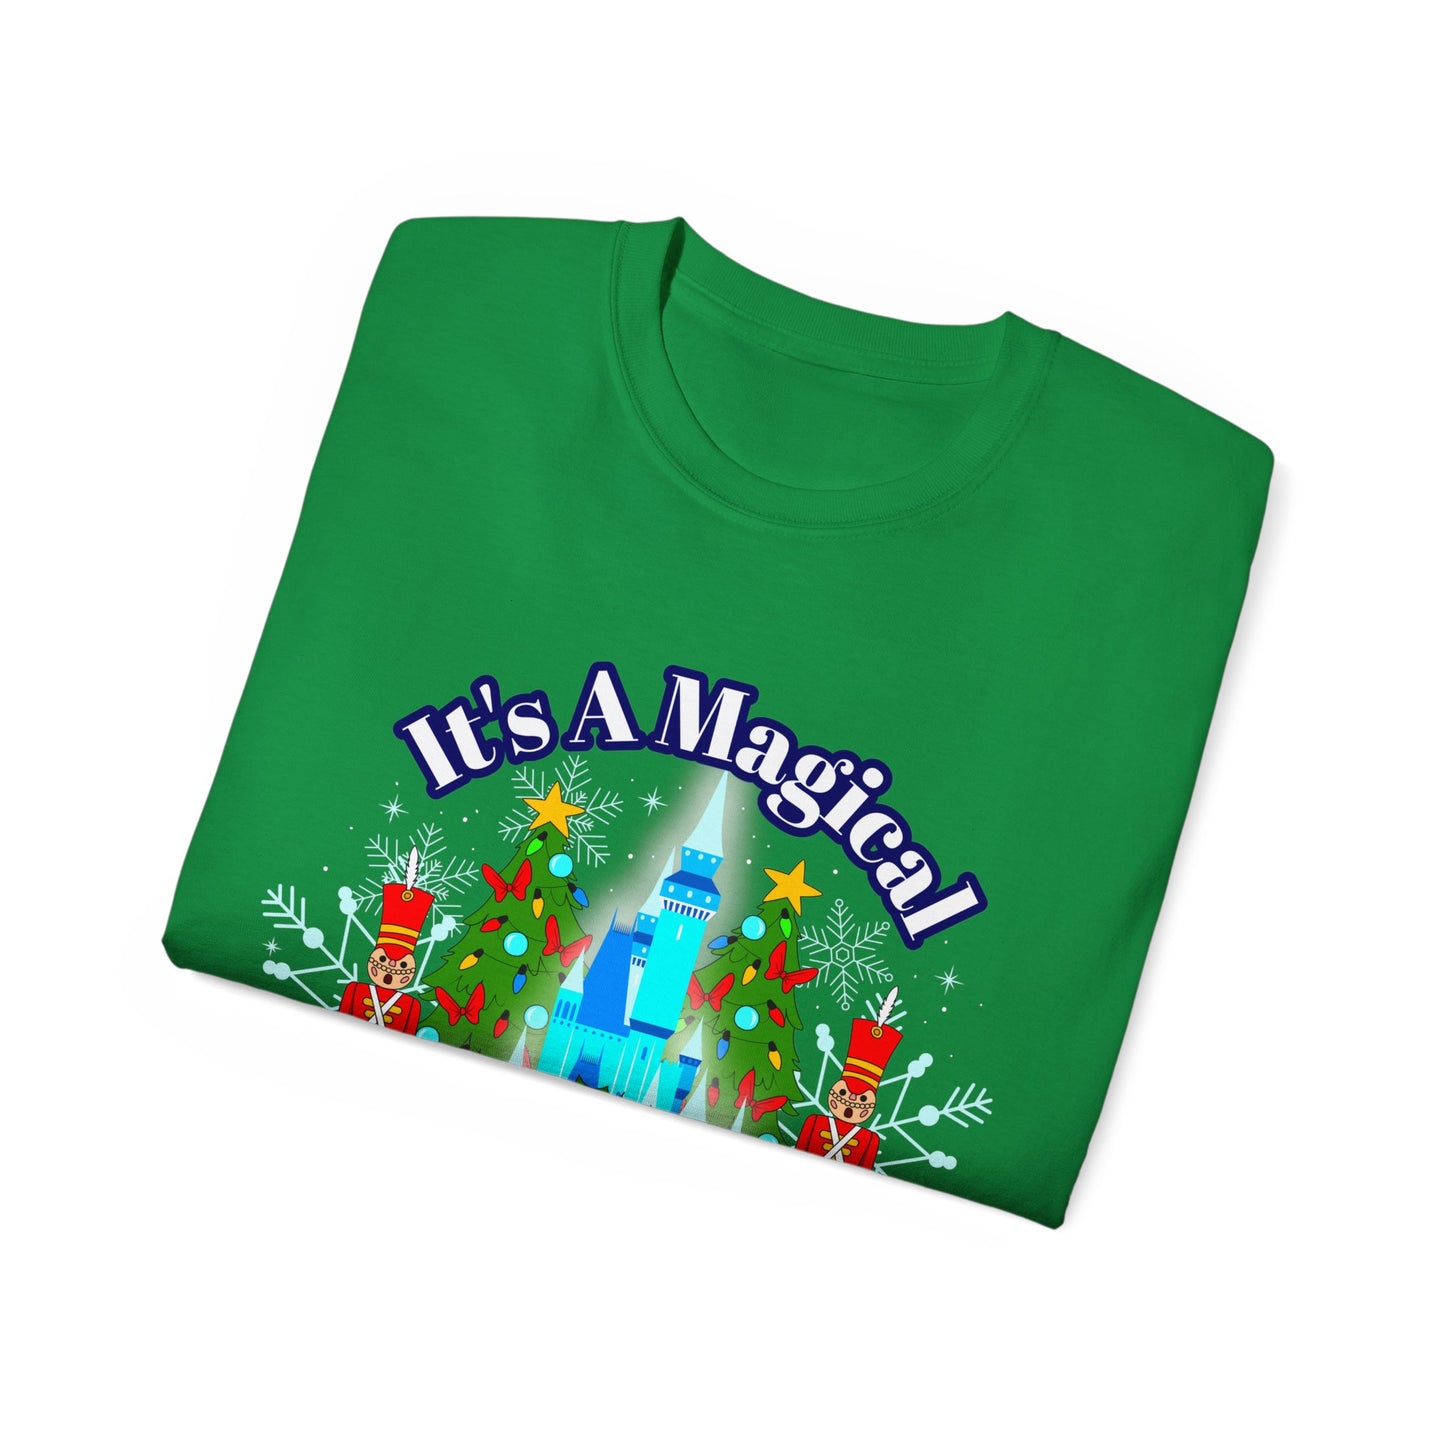 Magical Christmas Unisex Graphic Tee